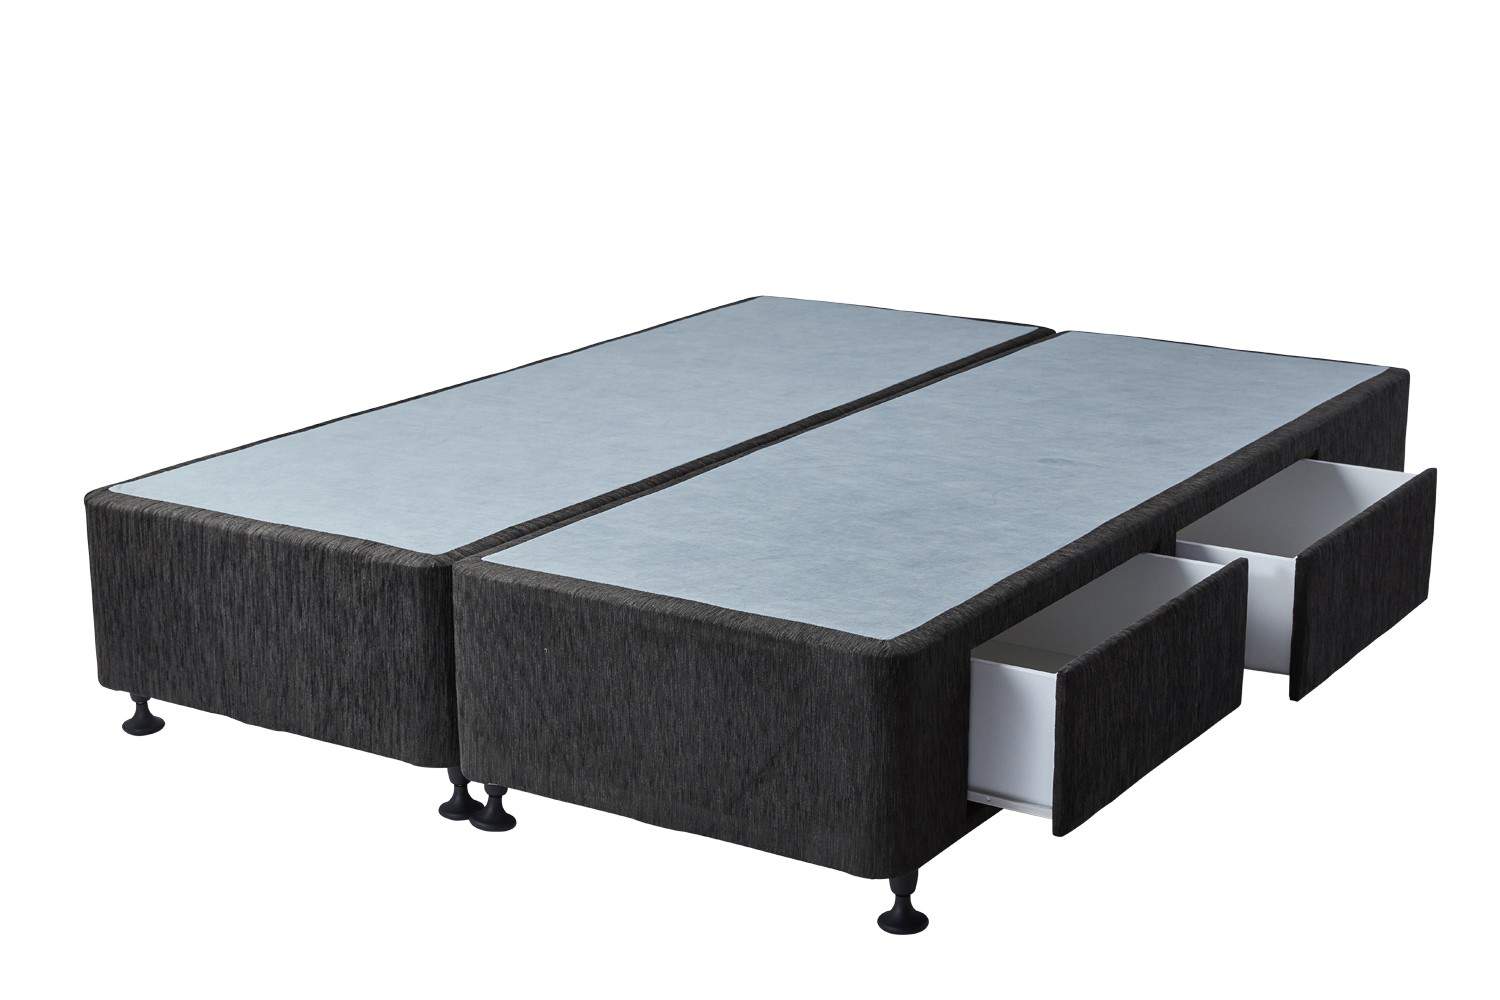 Bed base with drawers makin mattresses